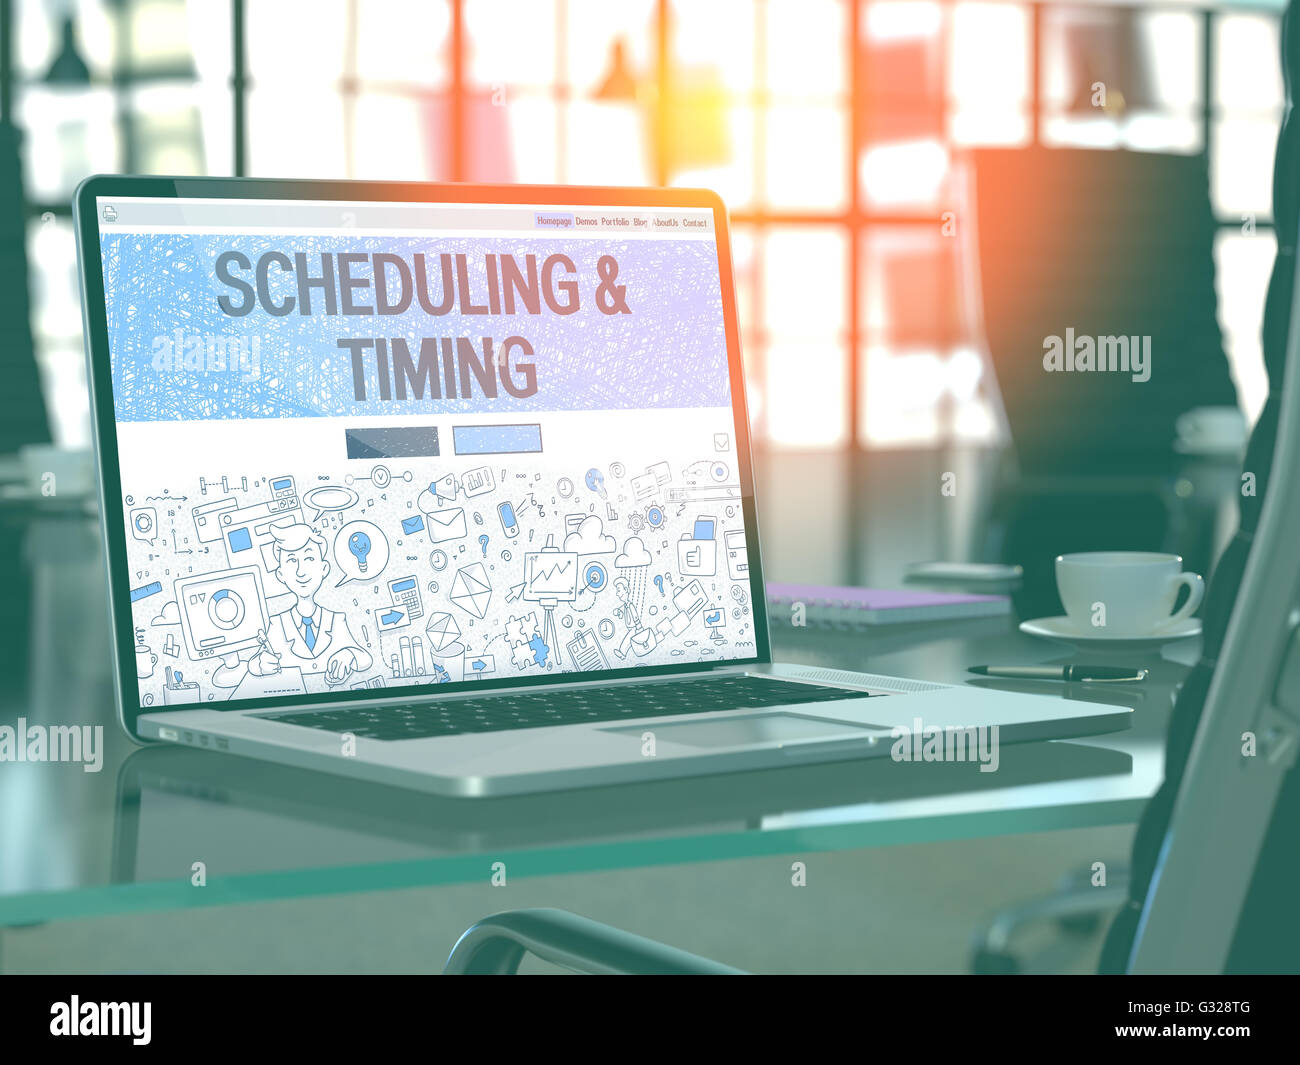 Scheduling and Timing Concept on Laptop Screen. Stock Photo